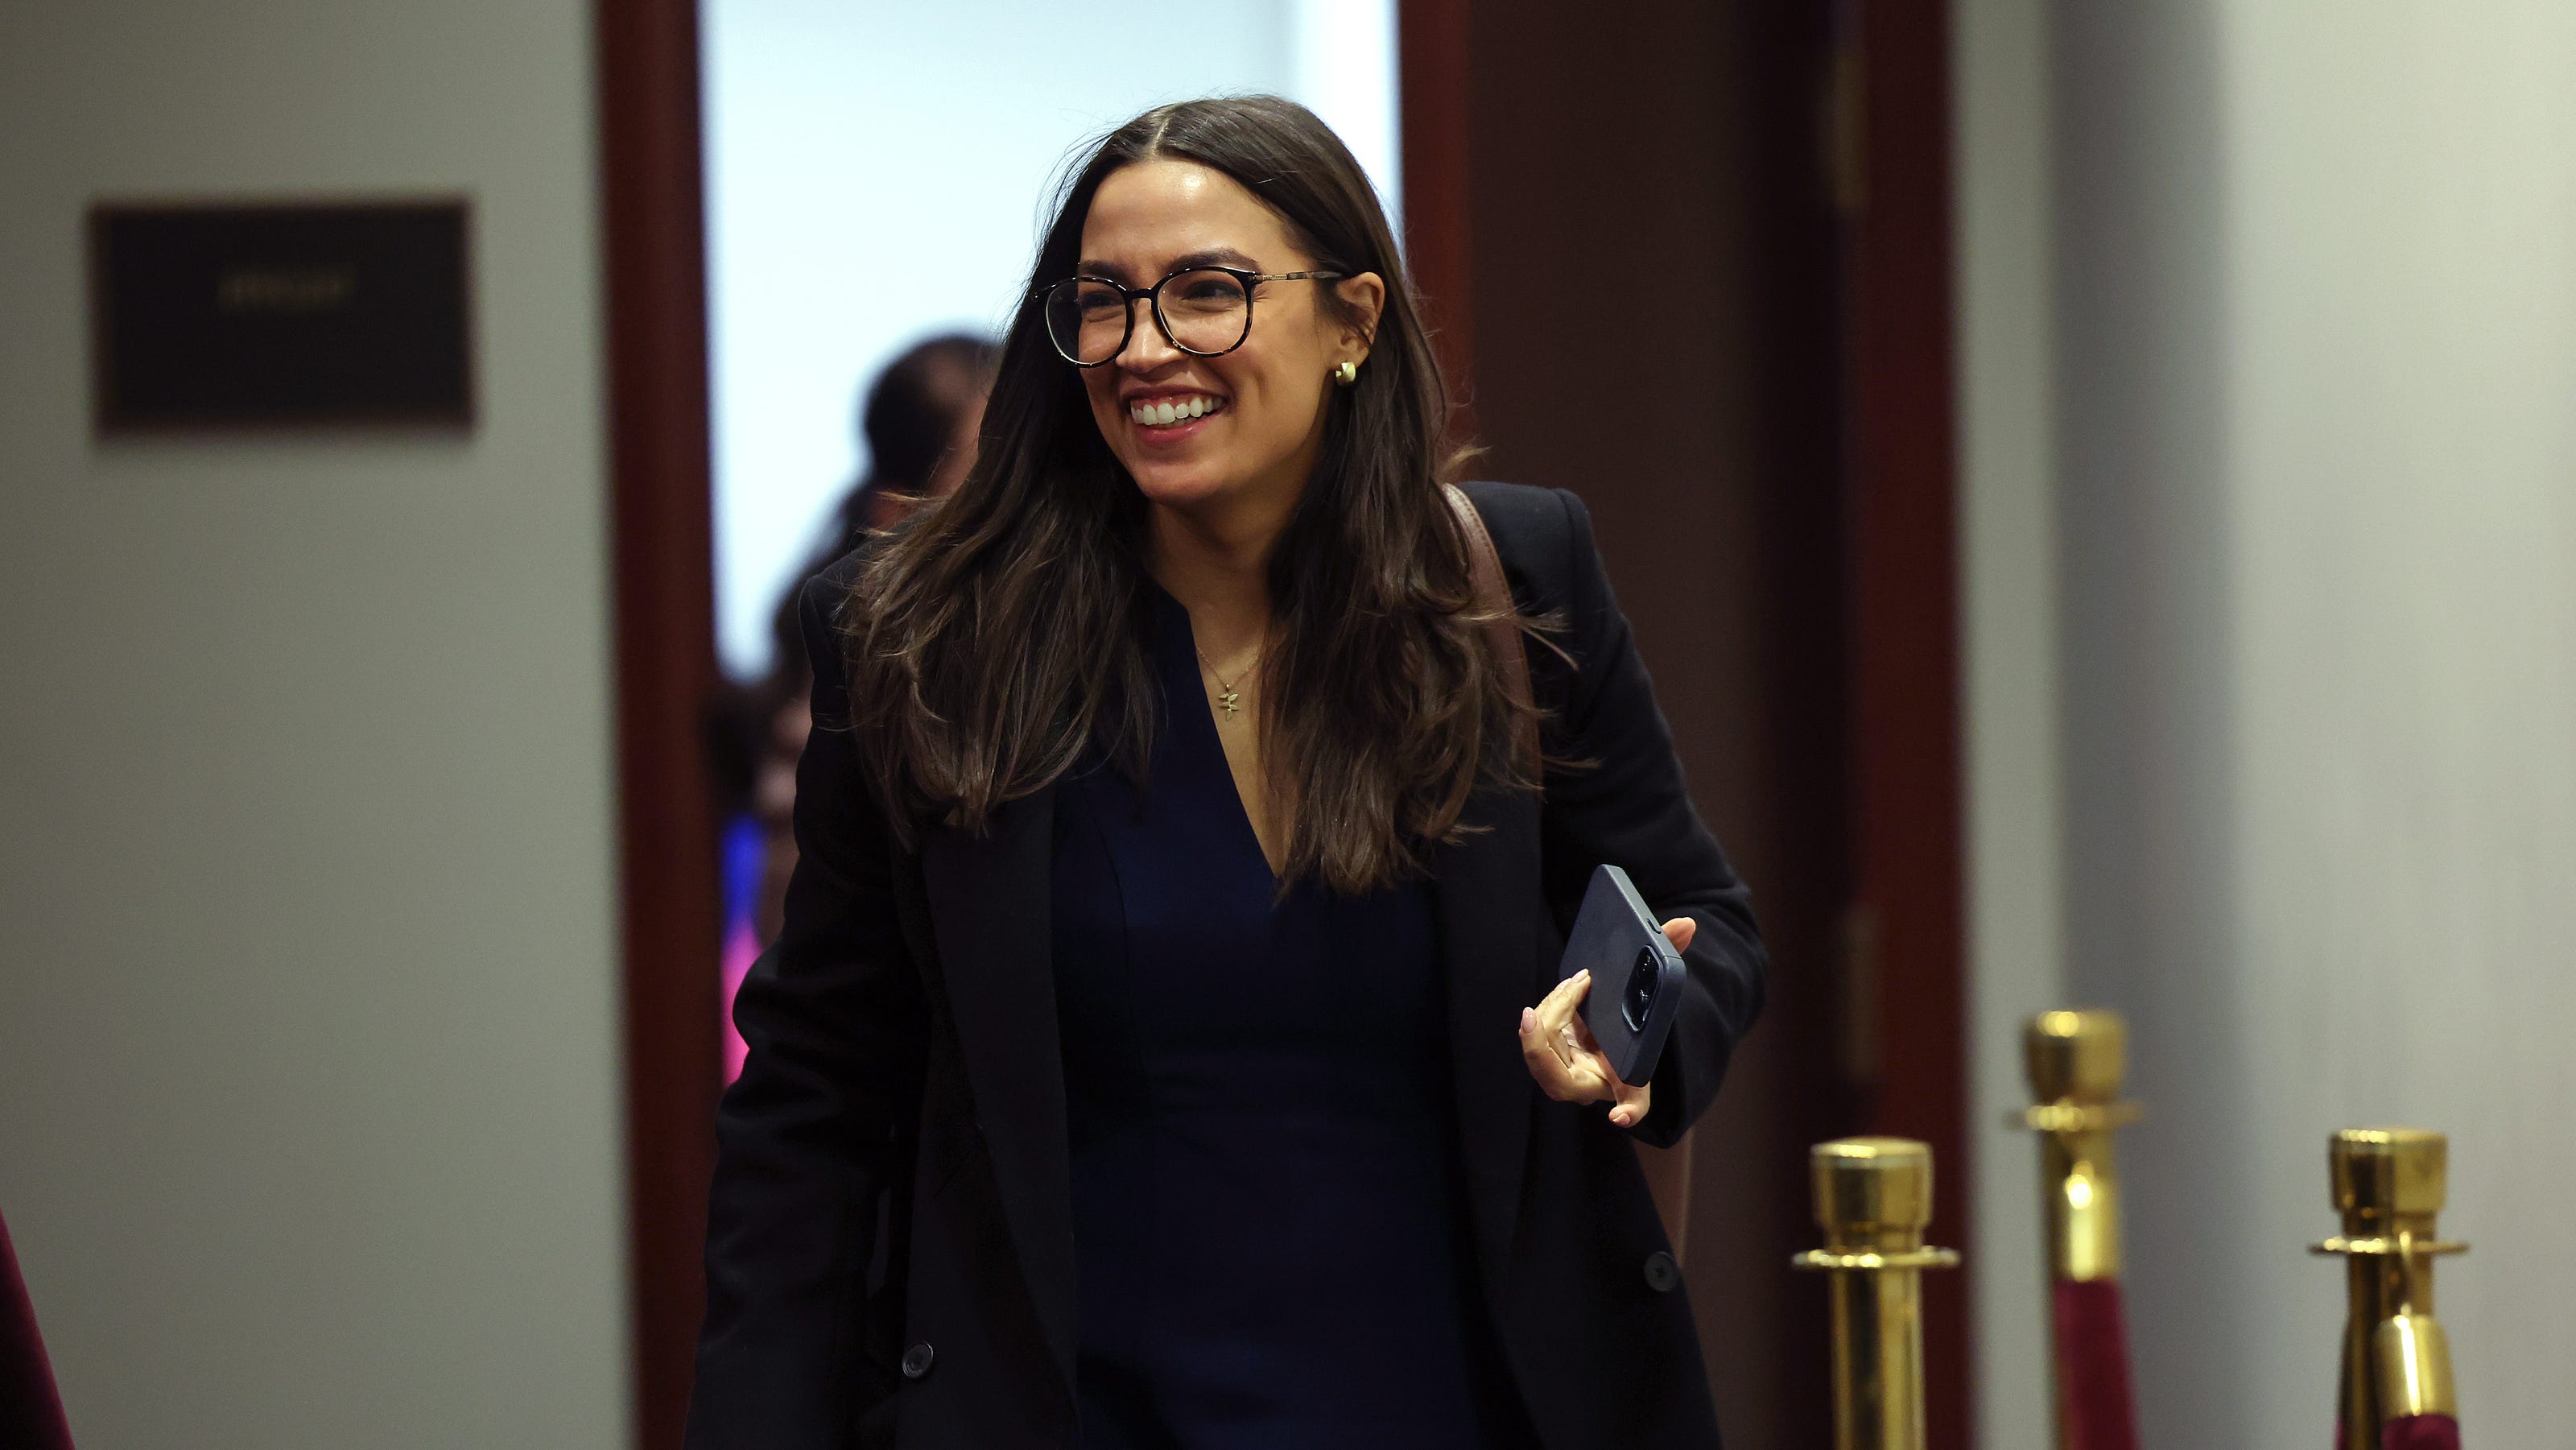 Image shows fabricated AOC post about conservatives' 'misogyny and racism' | Fact check